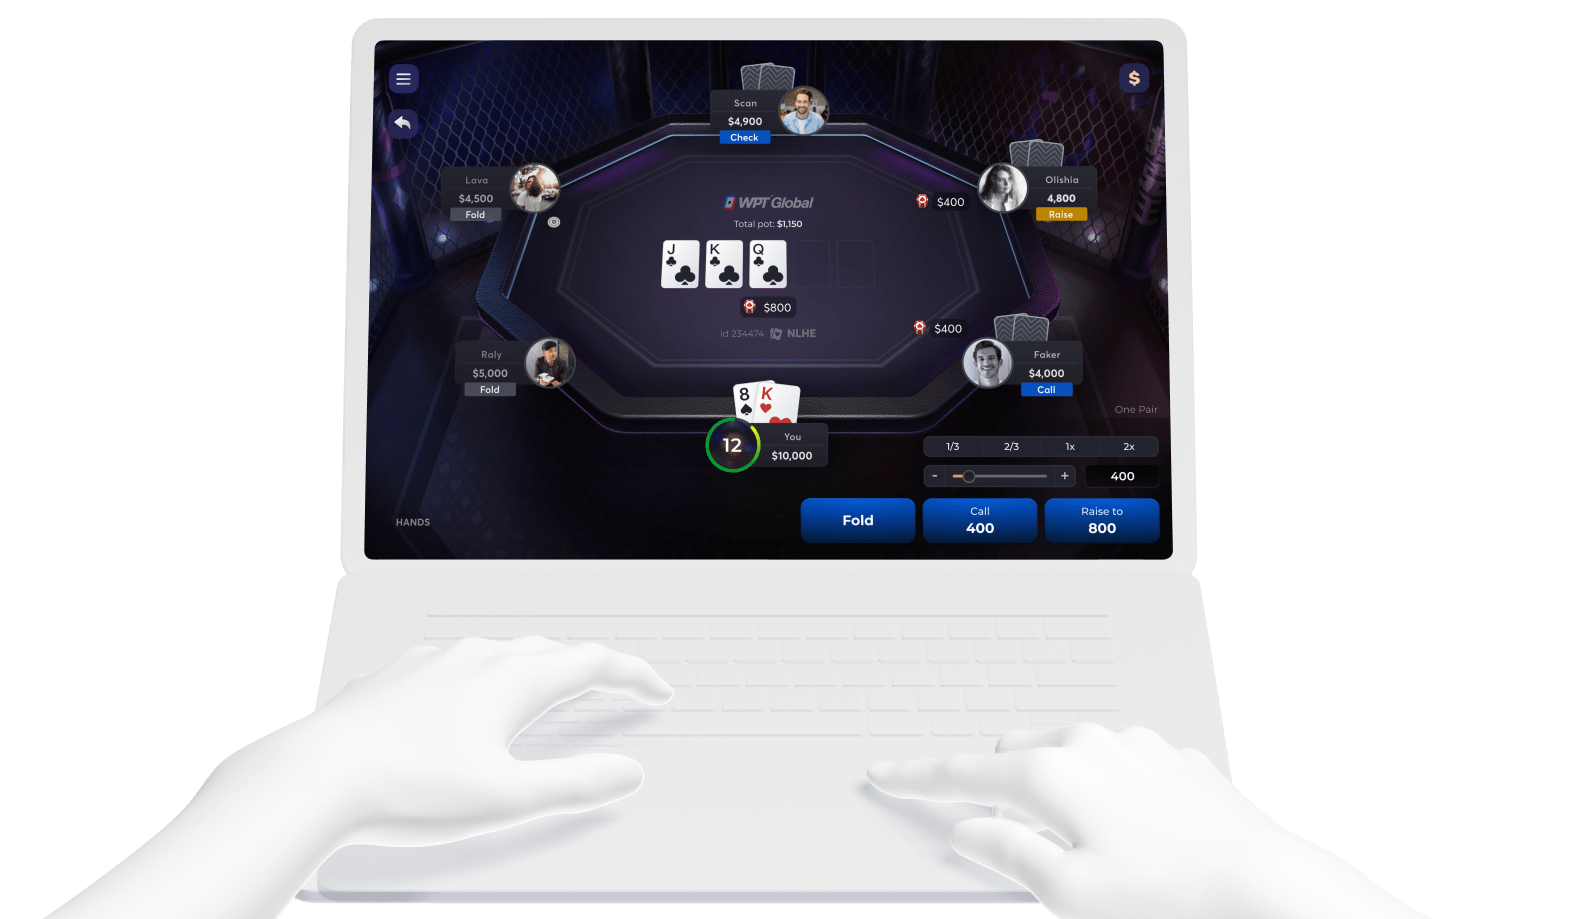 Download and Install WPT Global Poker: Free Application